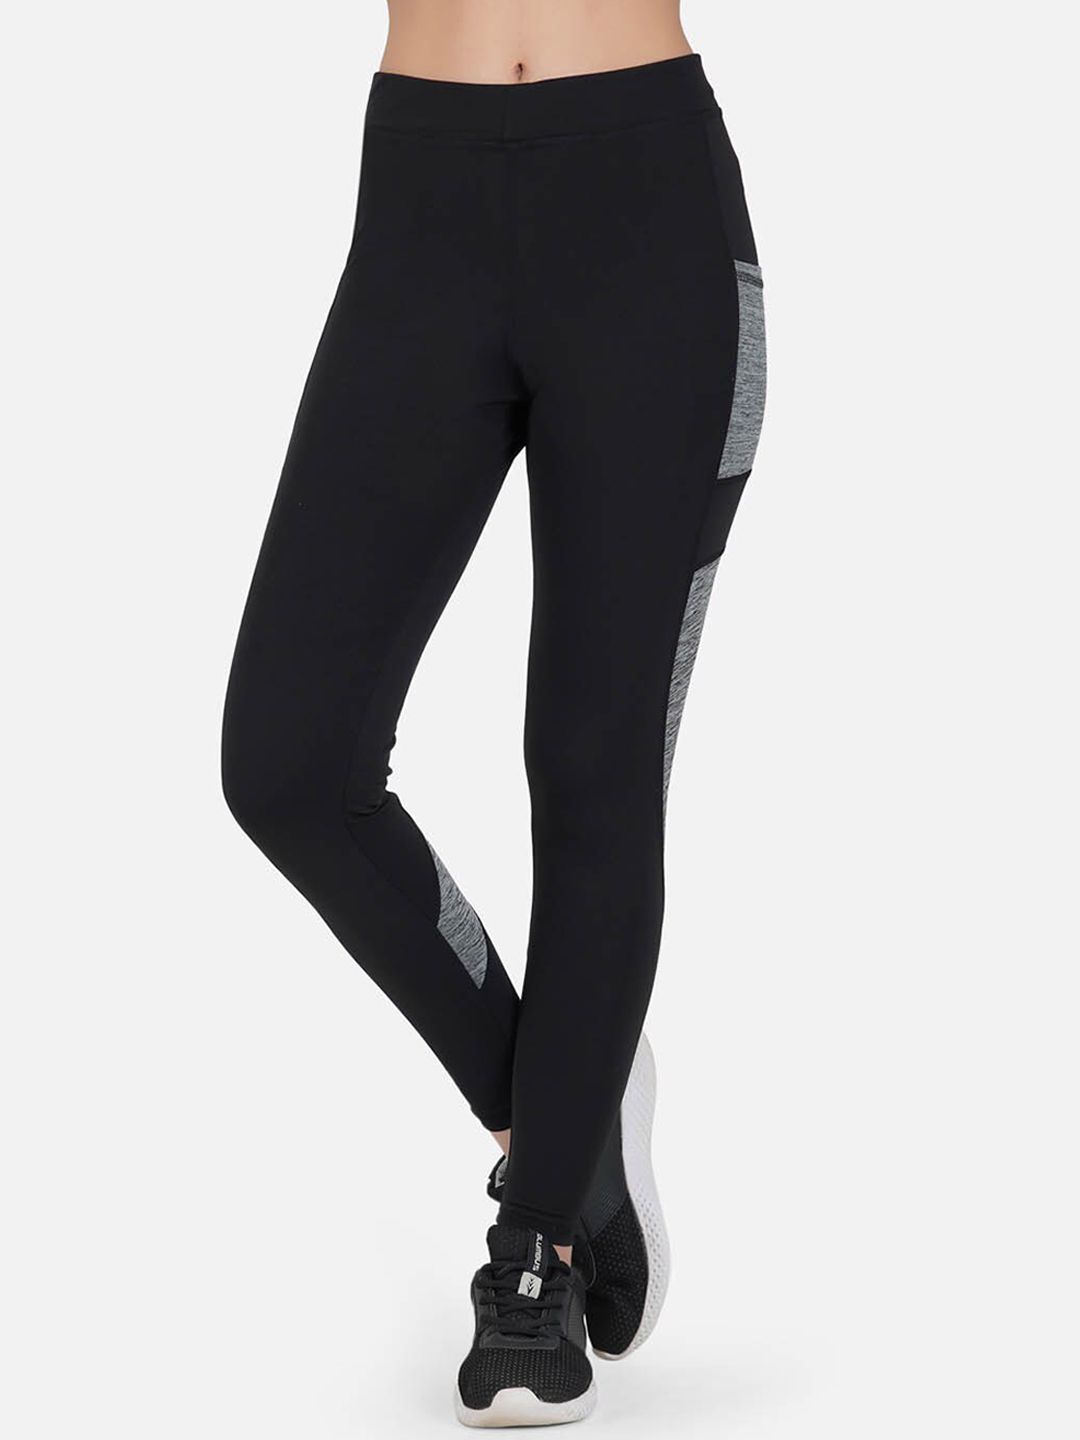 IMPERATIVE Women Black & Grey Patterned Slim Fit Tights Price in India